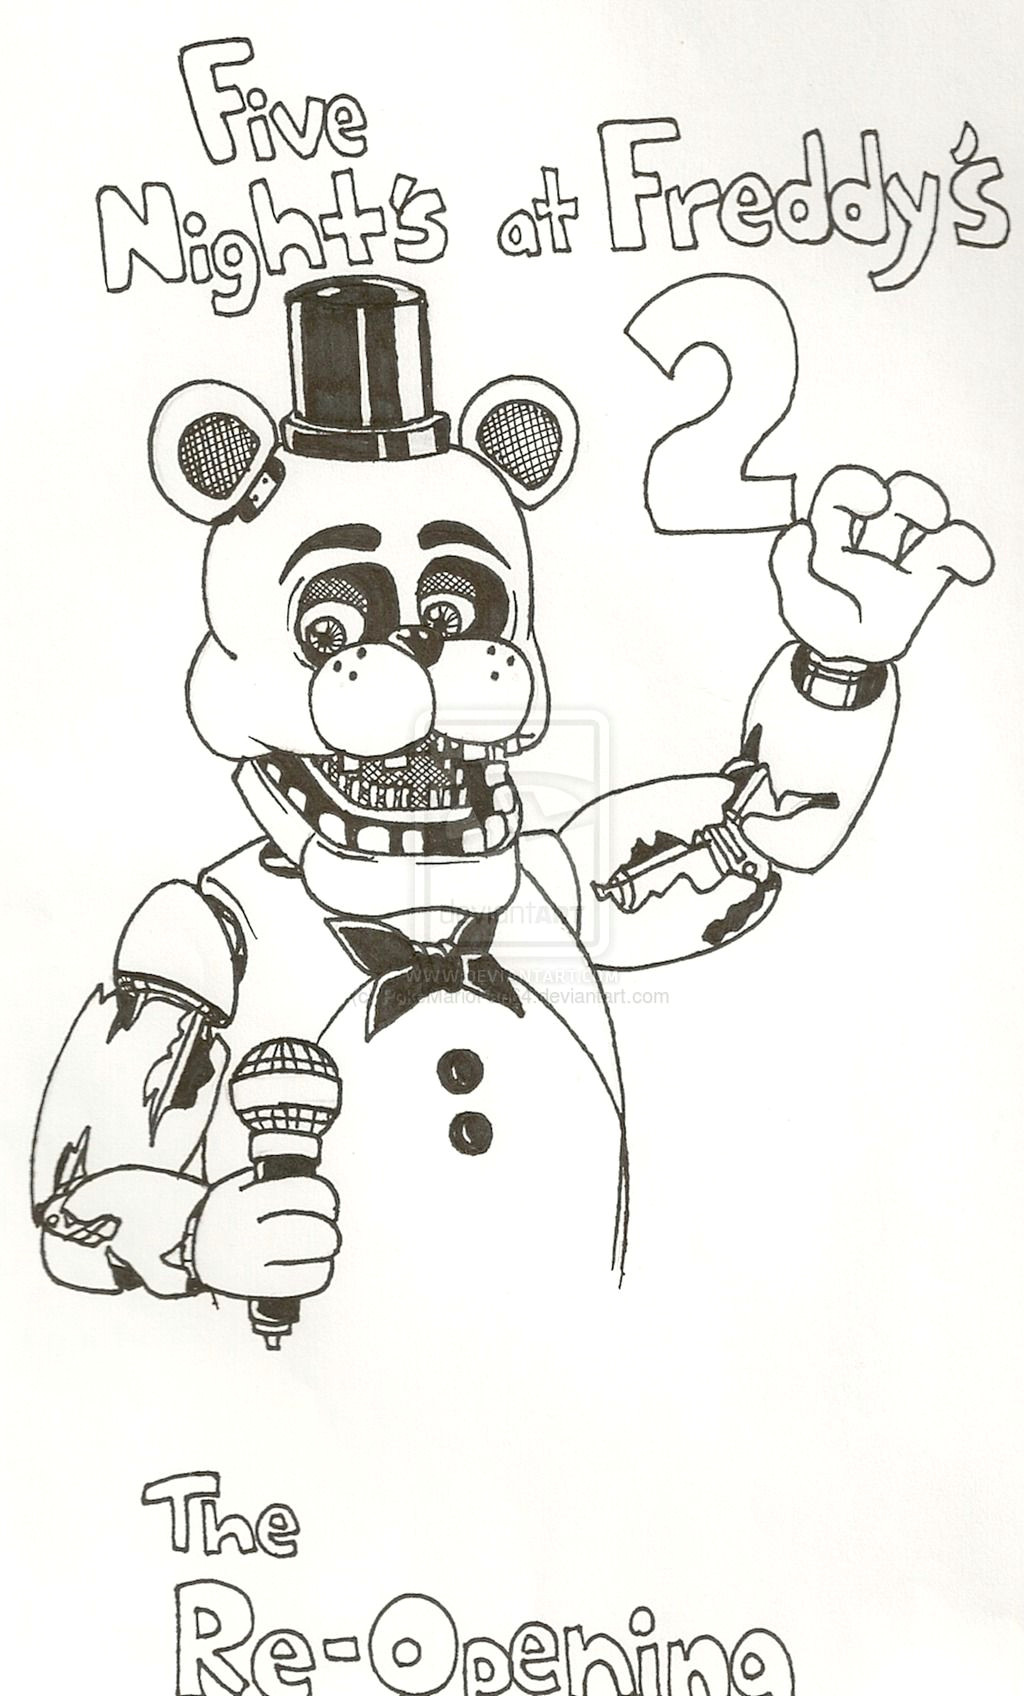 Drawing Cartoons Fnaf Pin by Lost Mind On Simple Fnaf Sketches Pinterest Sketches